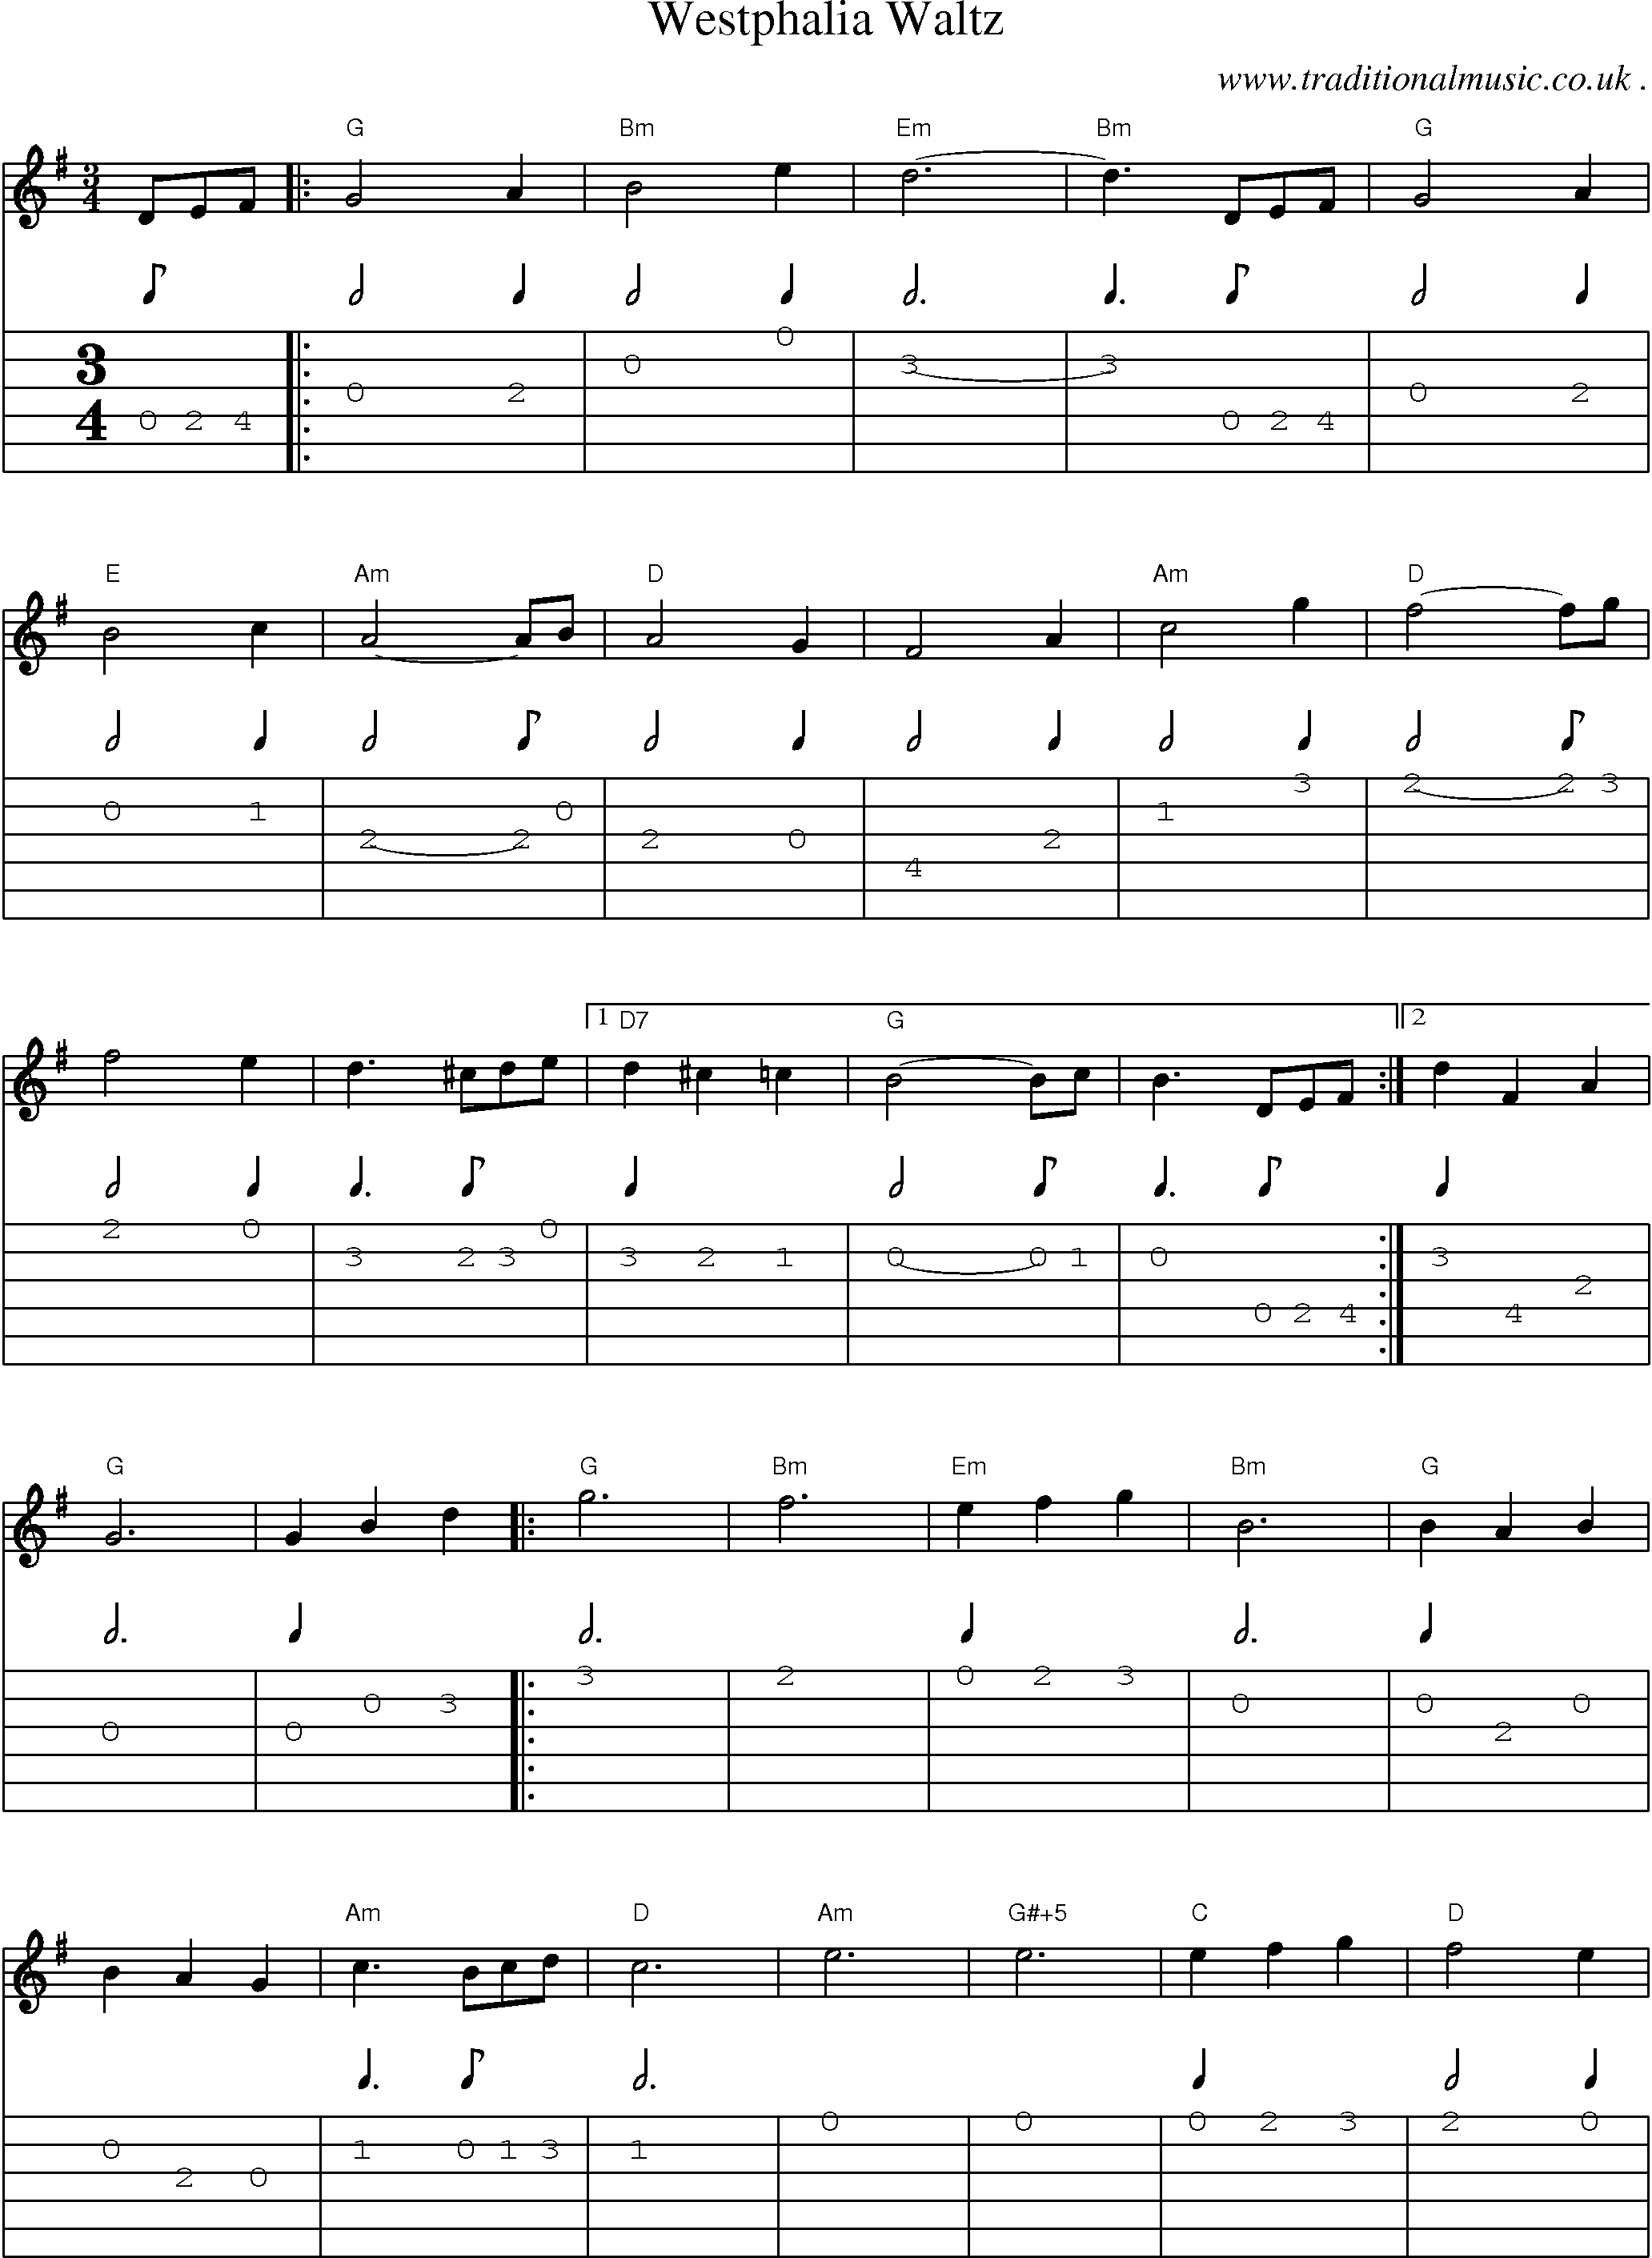 Sheet-Music and Guitar Tabs for Westphalia Waltz